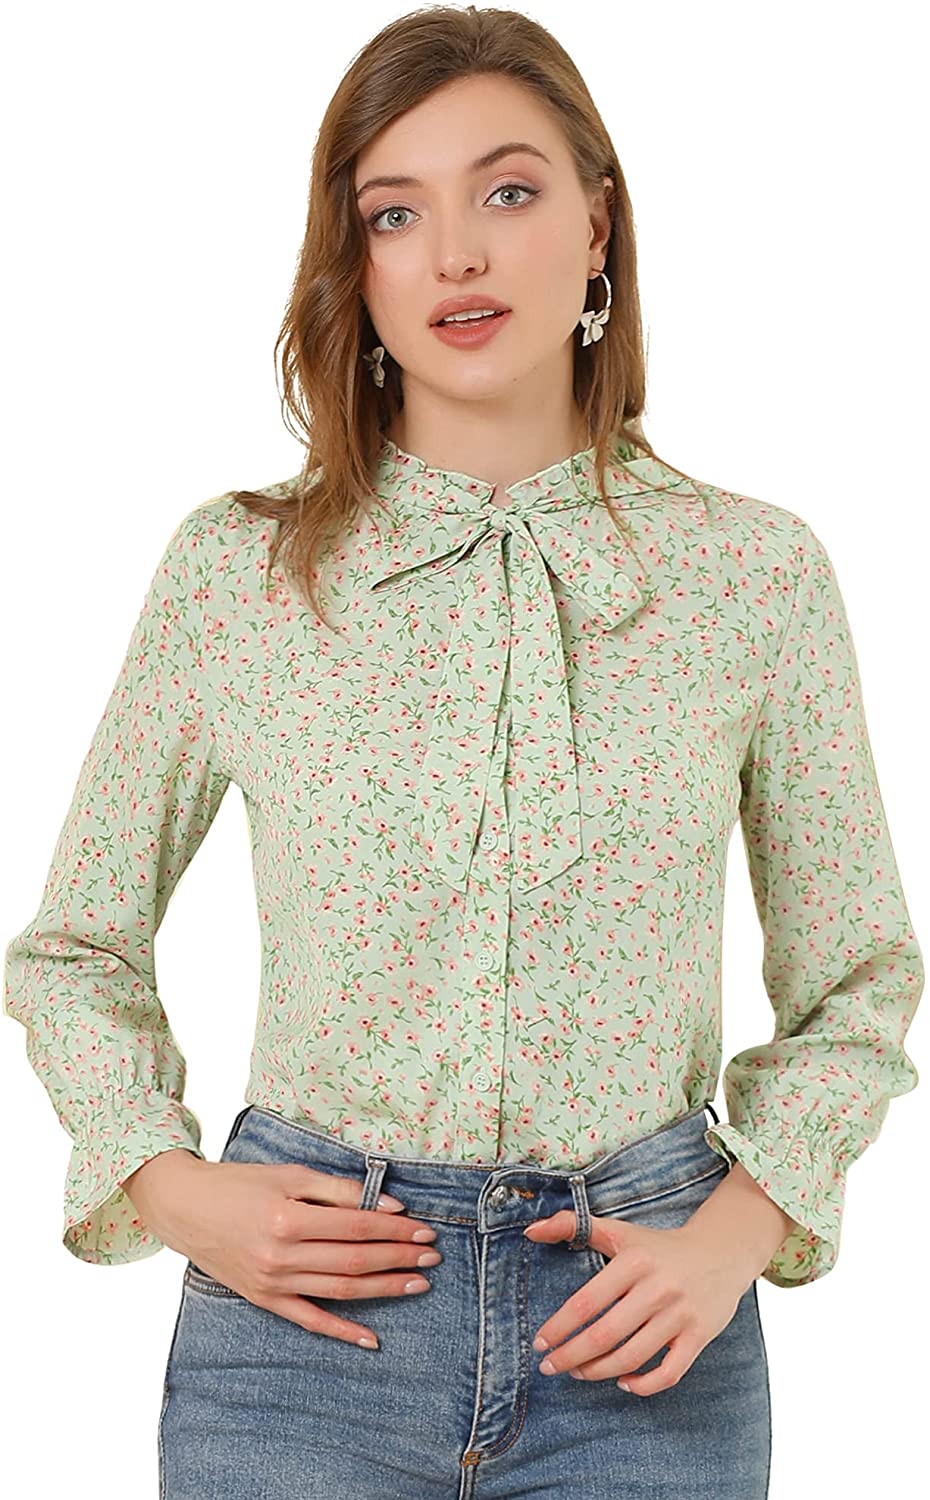 Vintage Bow Tie Blouses - Vintage Clothing, Fashion and Style